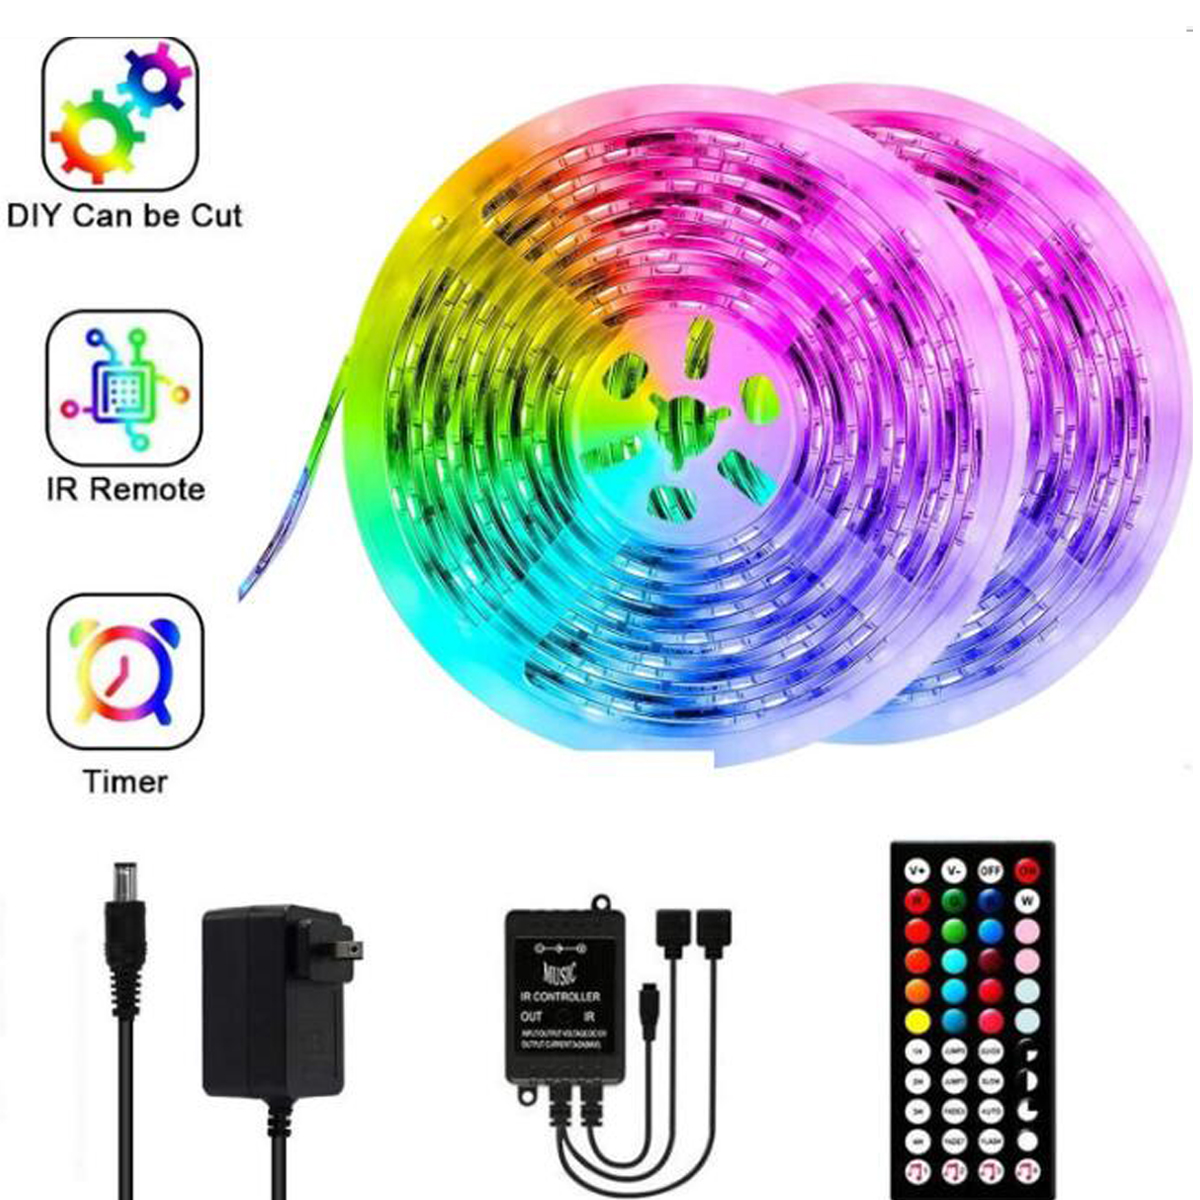 2x5M-Music-Sound-Activated-LED-Strip-Light-Waterproof-3528-RGB-Tape-Under-Cabinet-Kitchen-Lamp-Set---1730238-2